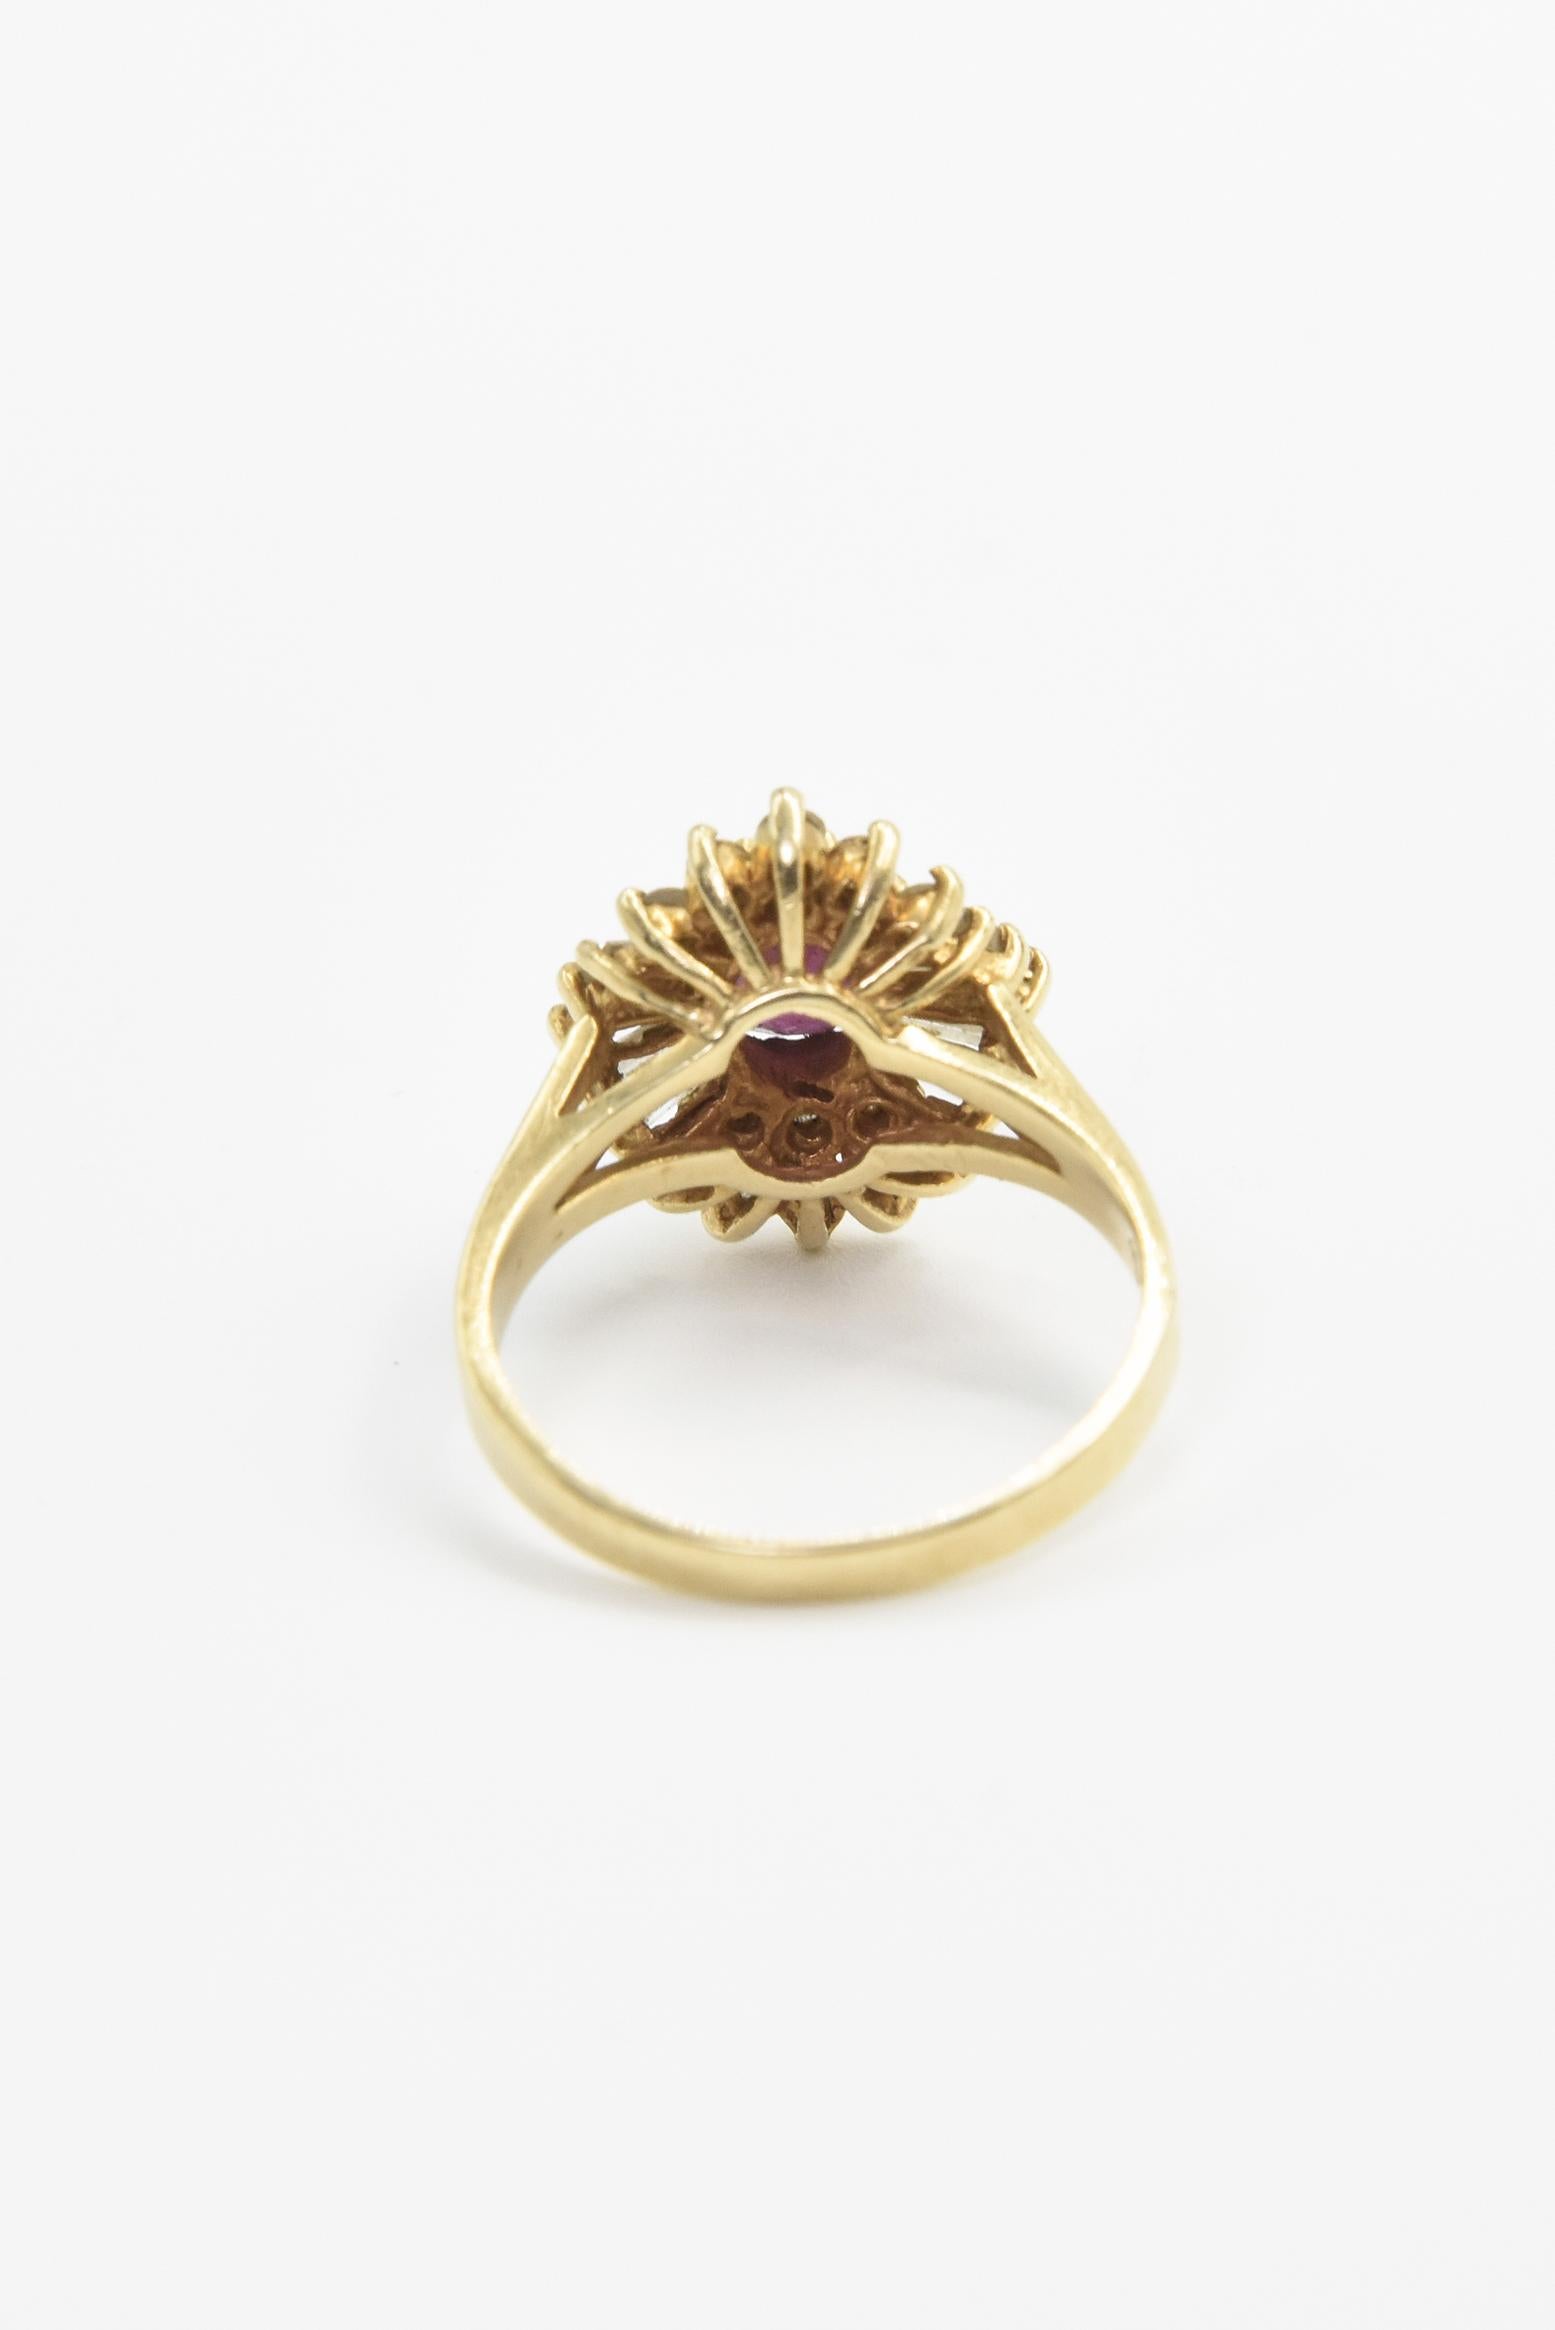 Ruby Diamond Ballerina Gold Cocktail Ring For Sale 3